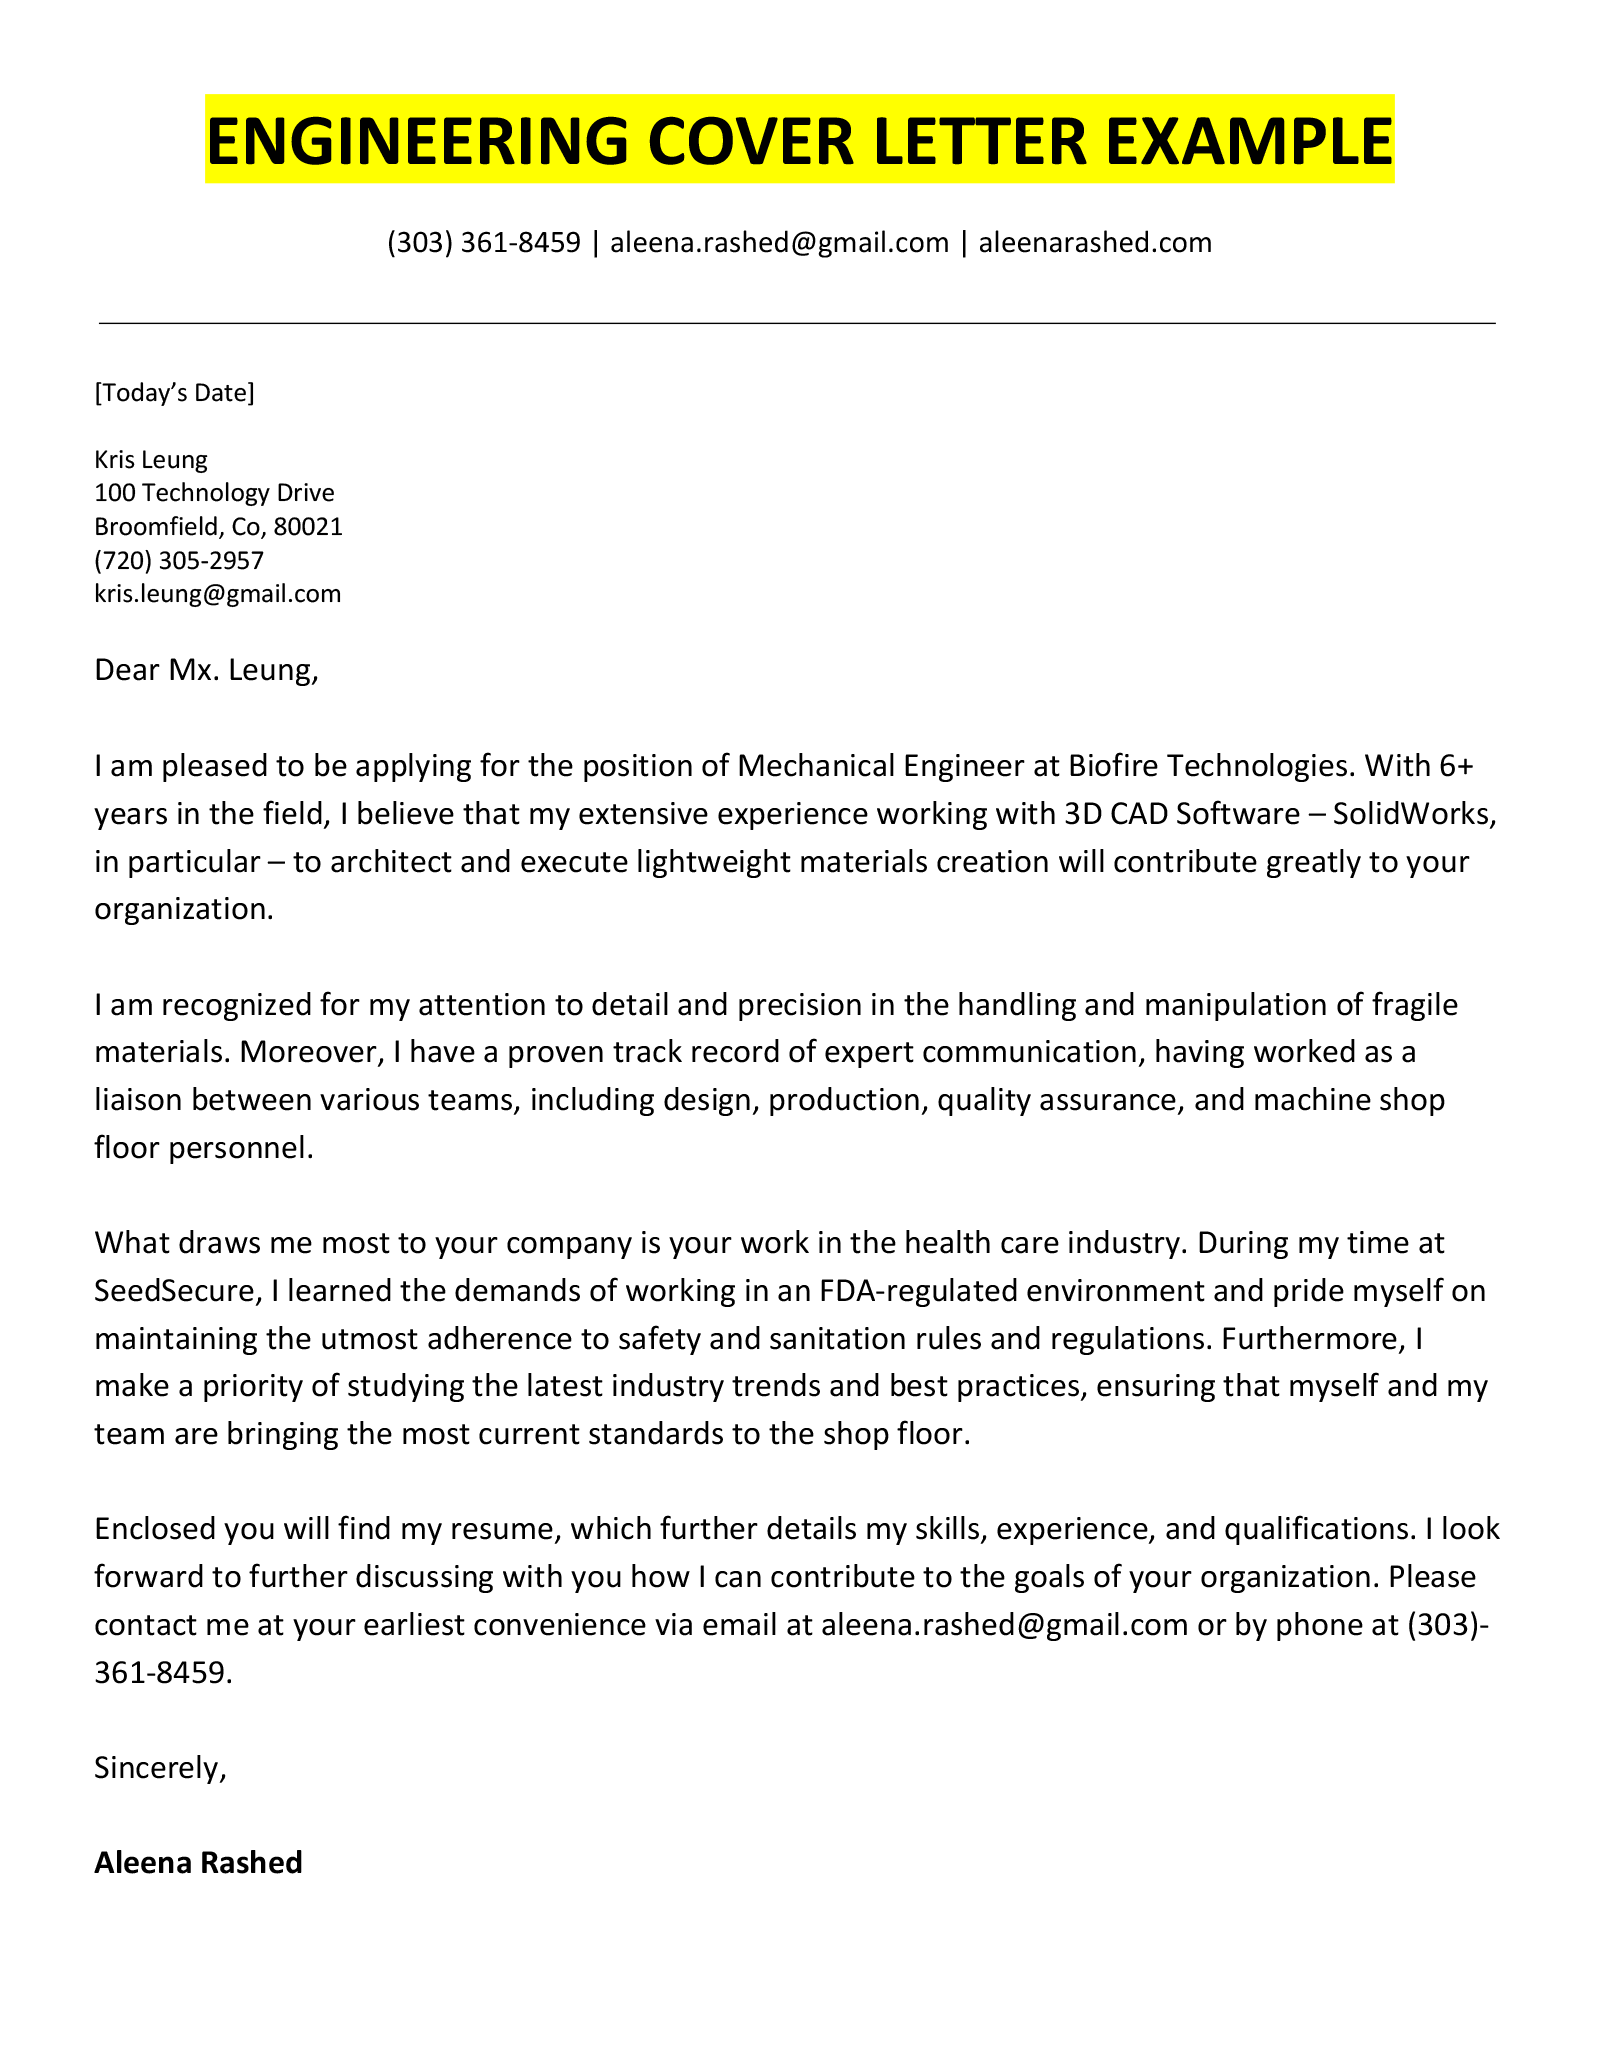 An example of an engineering cover letter